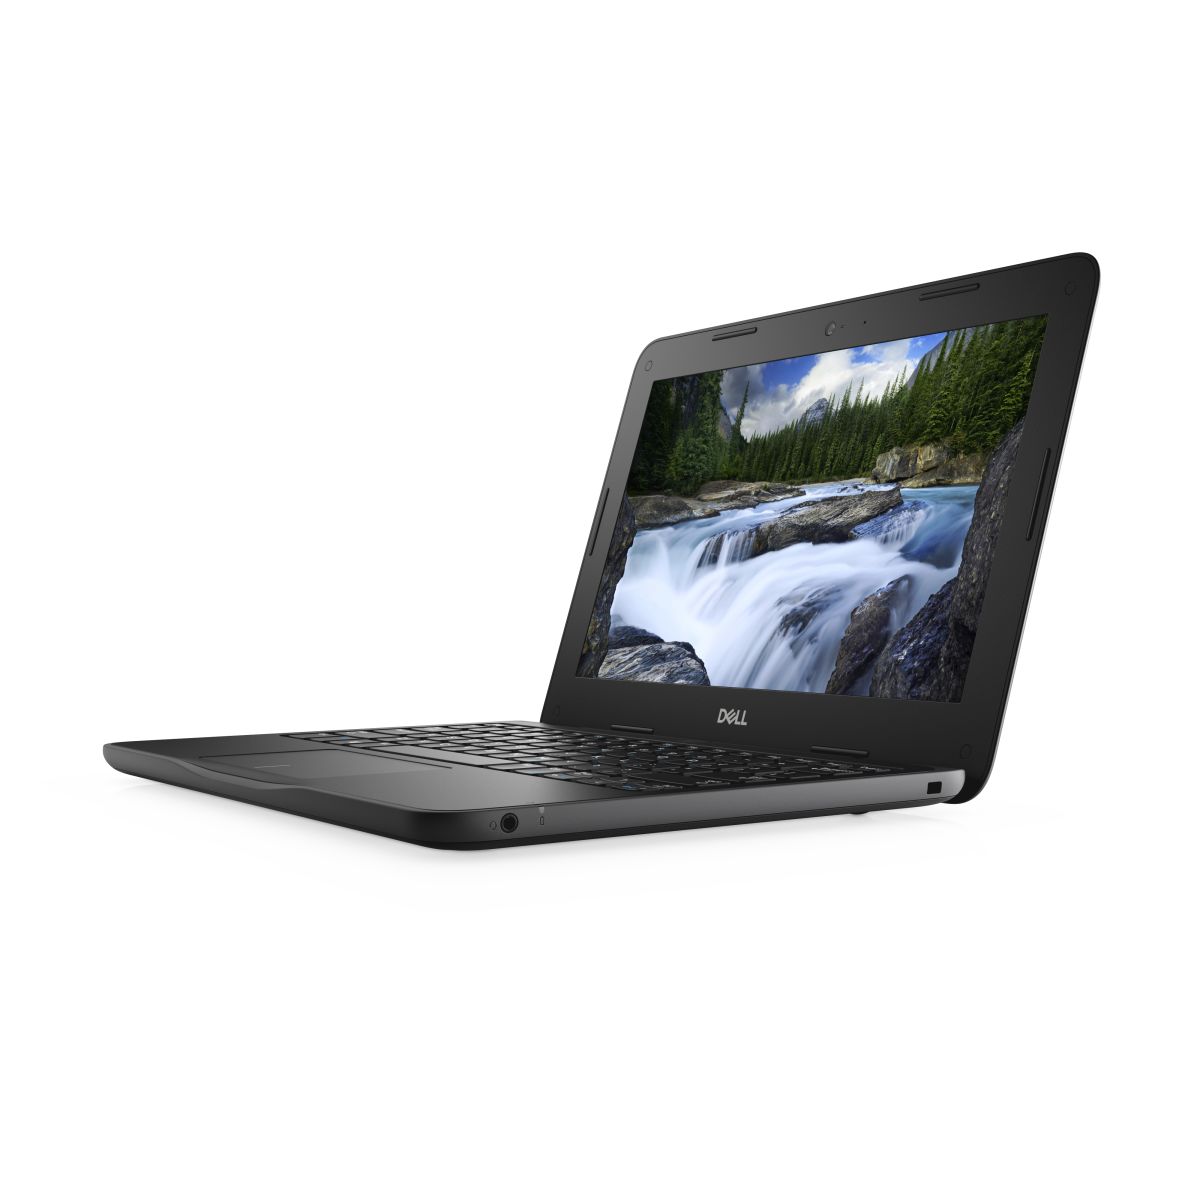 DELL Latitude 3190 - KR3P7 laptop specifications